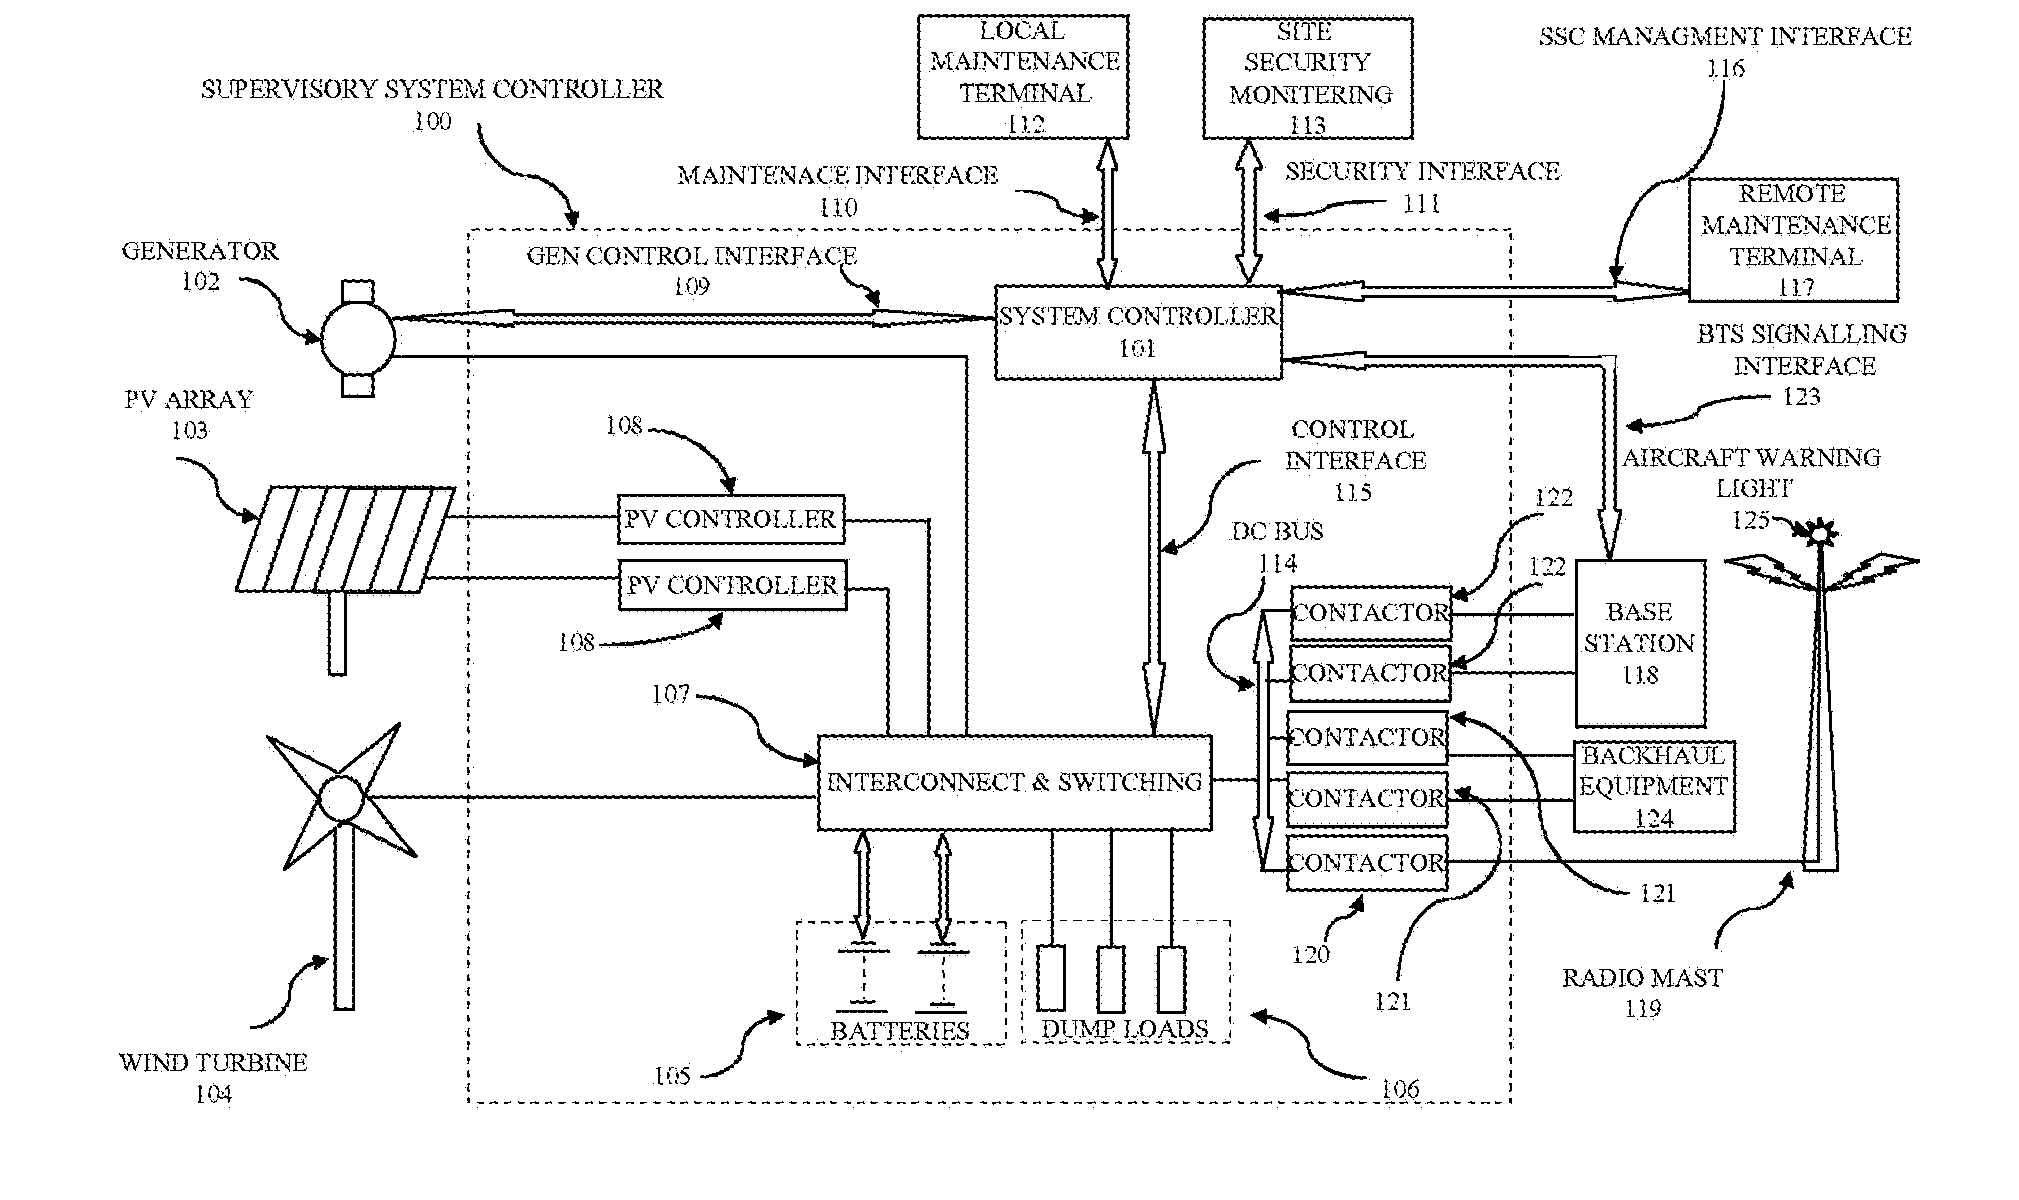 Supervisory system controller for use with a renewable energy powered radio telecommunications site